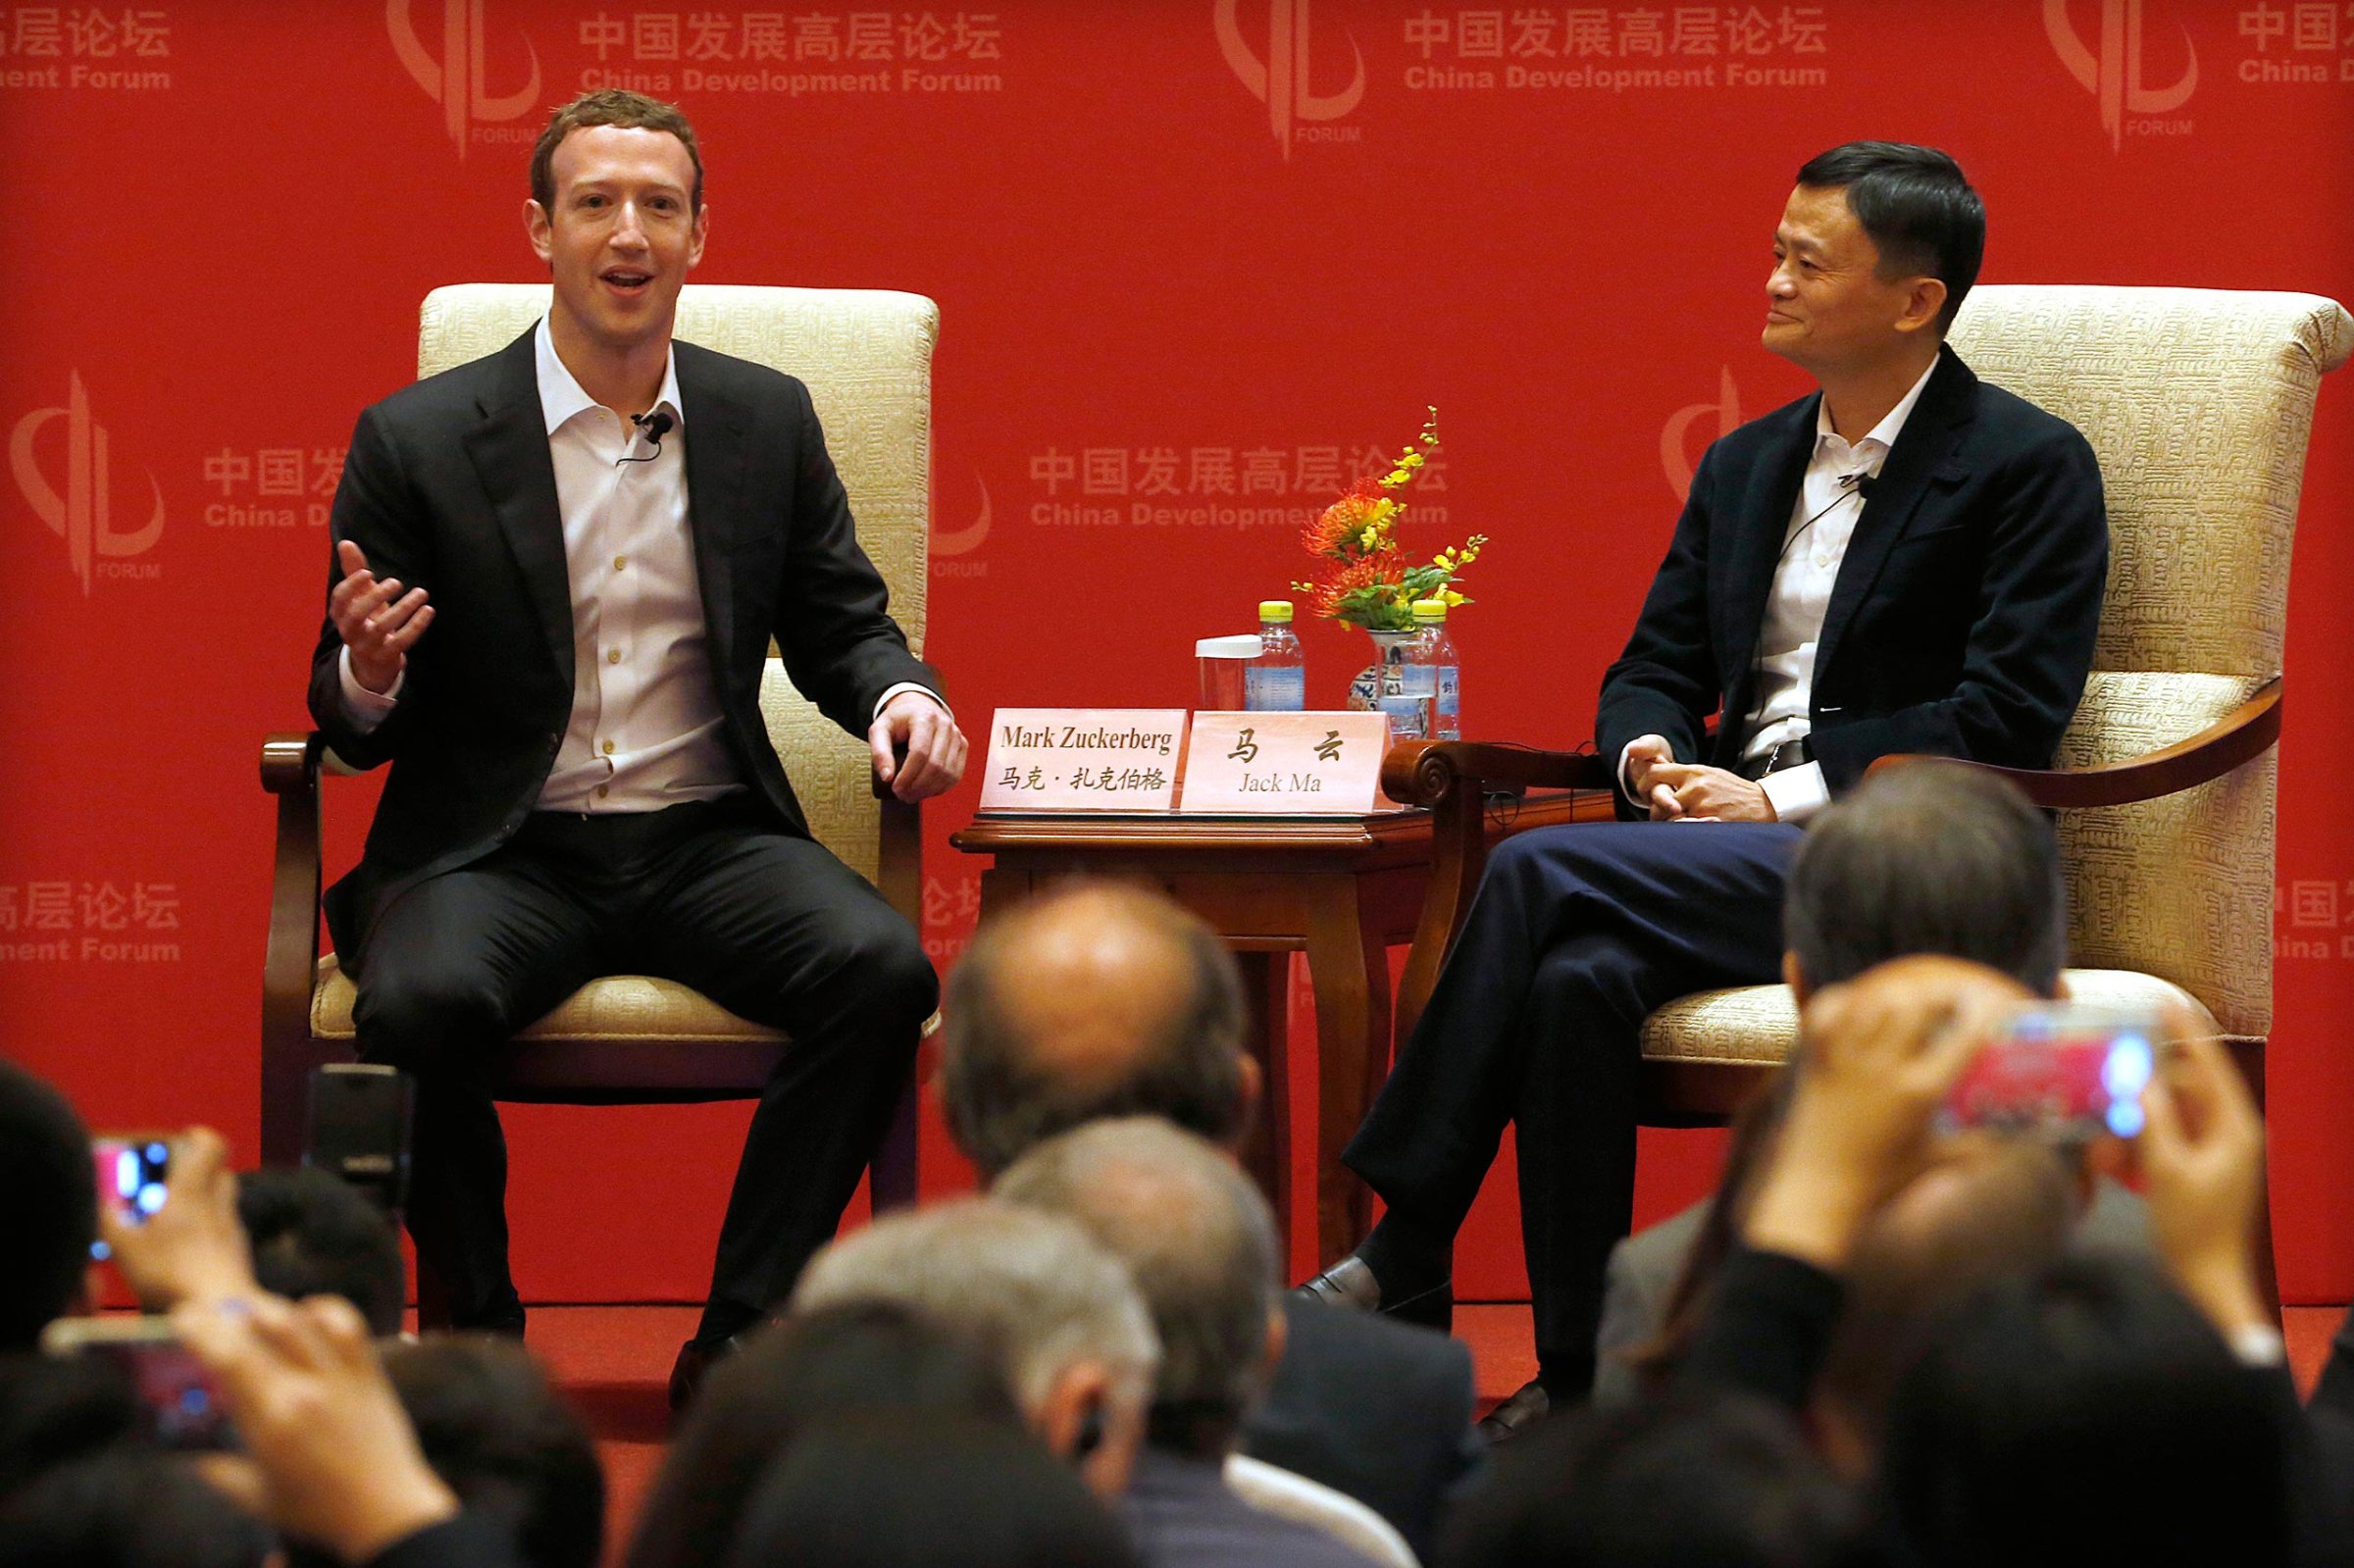 Facebook CEO Mark Zuckerberg speaks as Jack Ma, executive chairman of the Alibaba Group, listens during a panel discussion held as part of the China Development Forum at the Diaoyutai State Guesthouse in Beijing, China, March 19, 2016.